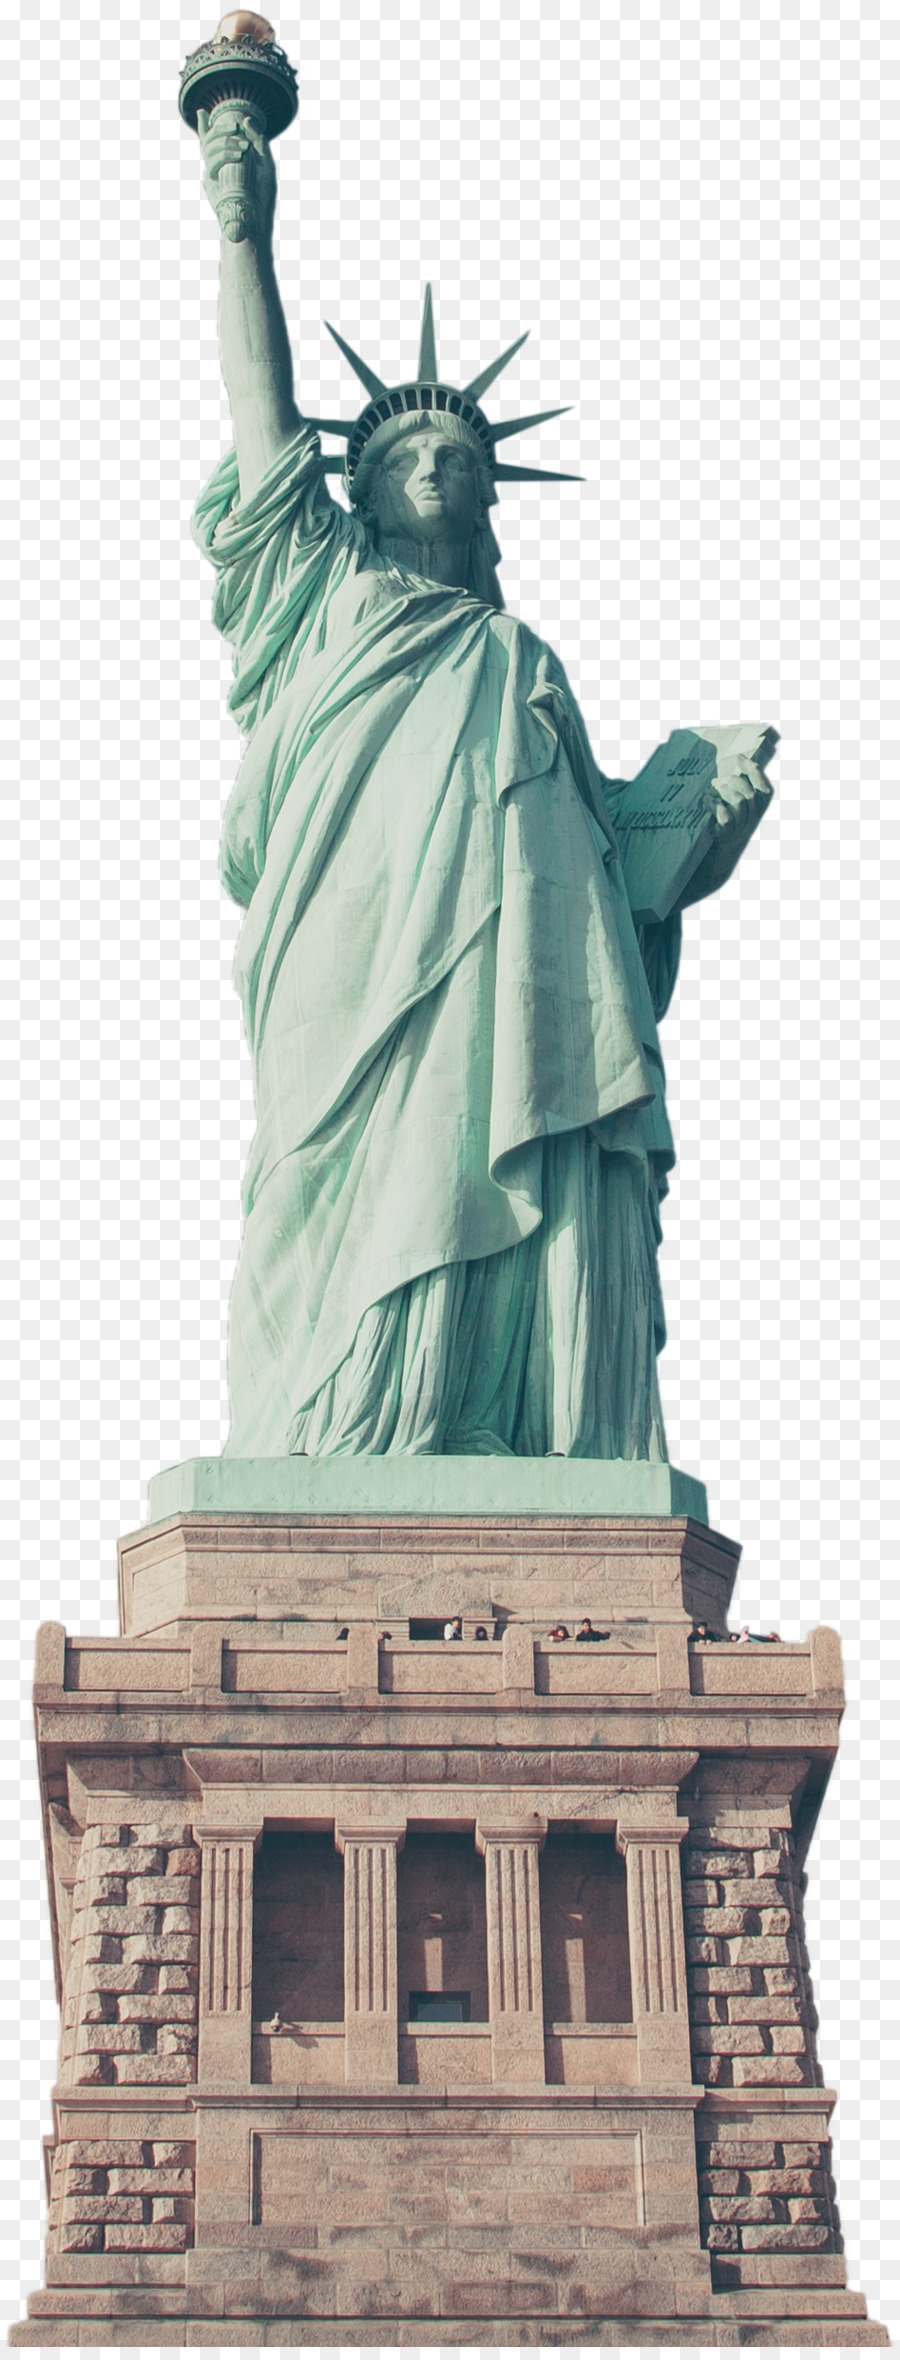 Statue of Liberty National Monument National Park Service - Statue of Liberty Transparent PNG png download - 947*2470 - Free Transparent Statue Of Liberty png Download.